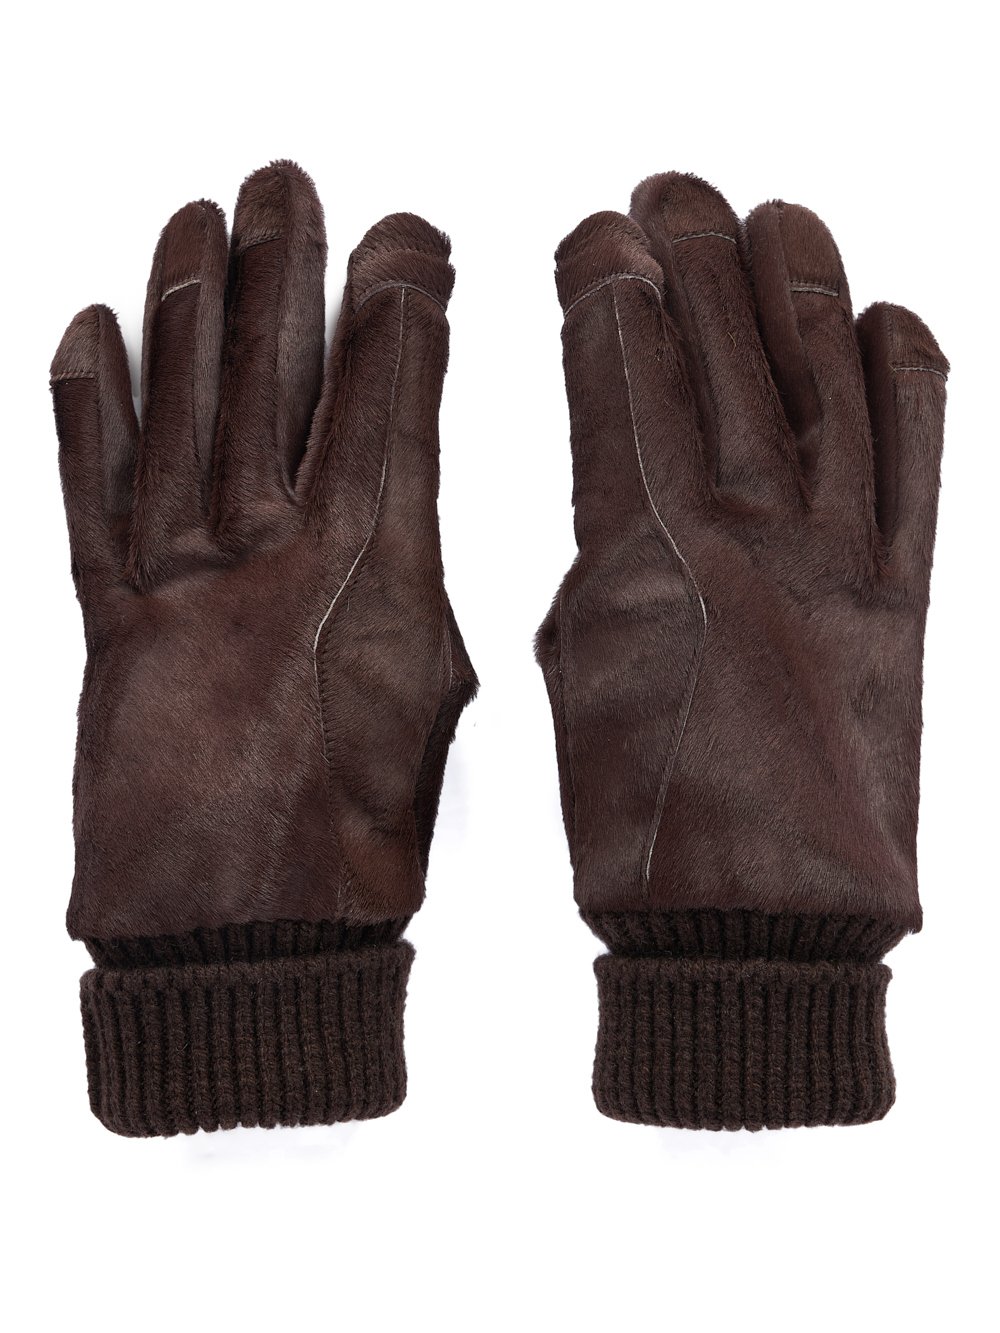 RICK OWENS FW23 LUXOR RUNWAY SHORT RIBCUFF GLOVES IN BROWN SHAVED CALF LEATHER